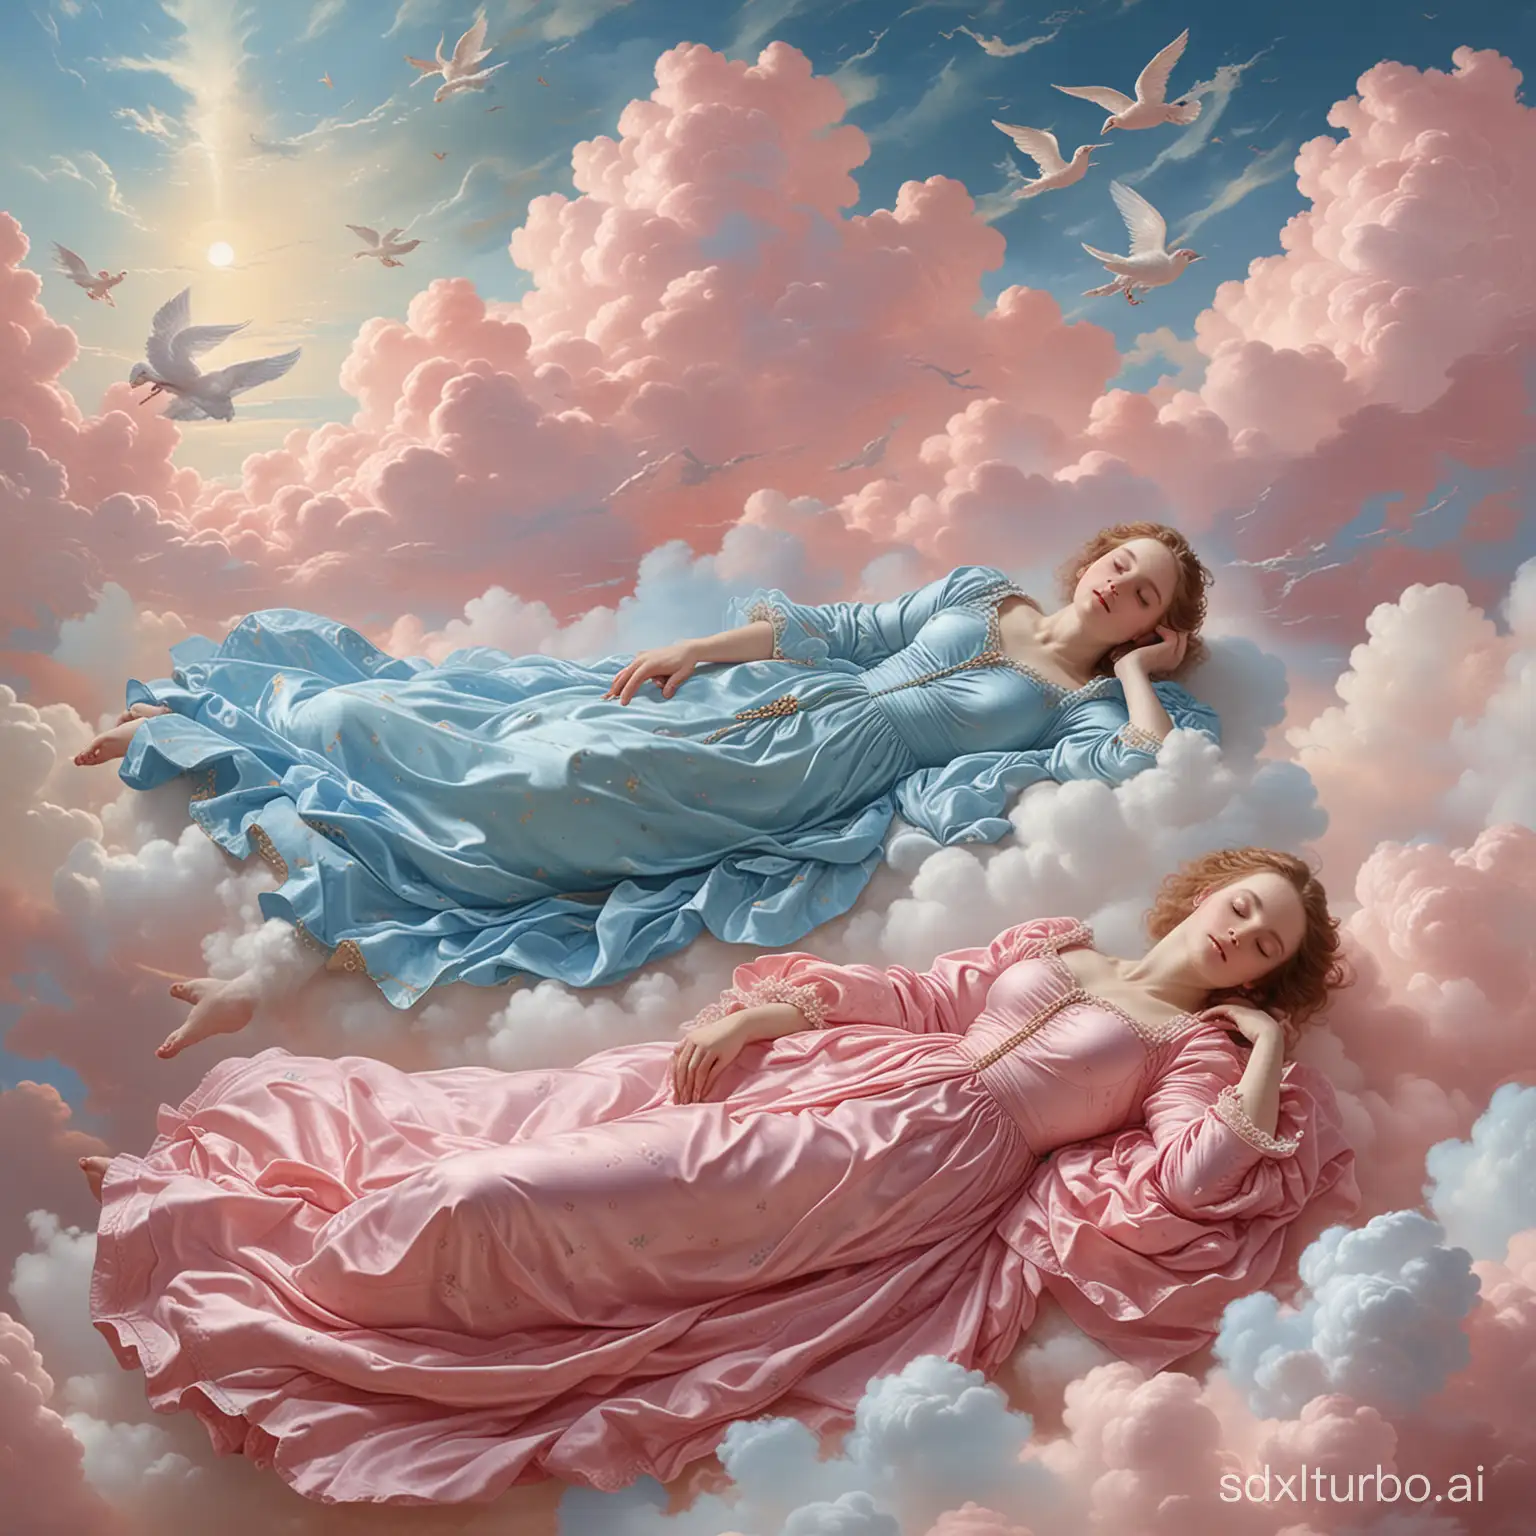 Renaissanceinspired-Painting-of-Two-Women-on-Clouds-in-Blue-and-Pink-Tones